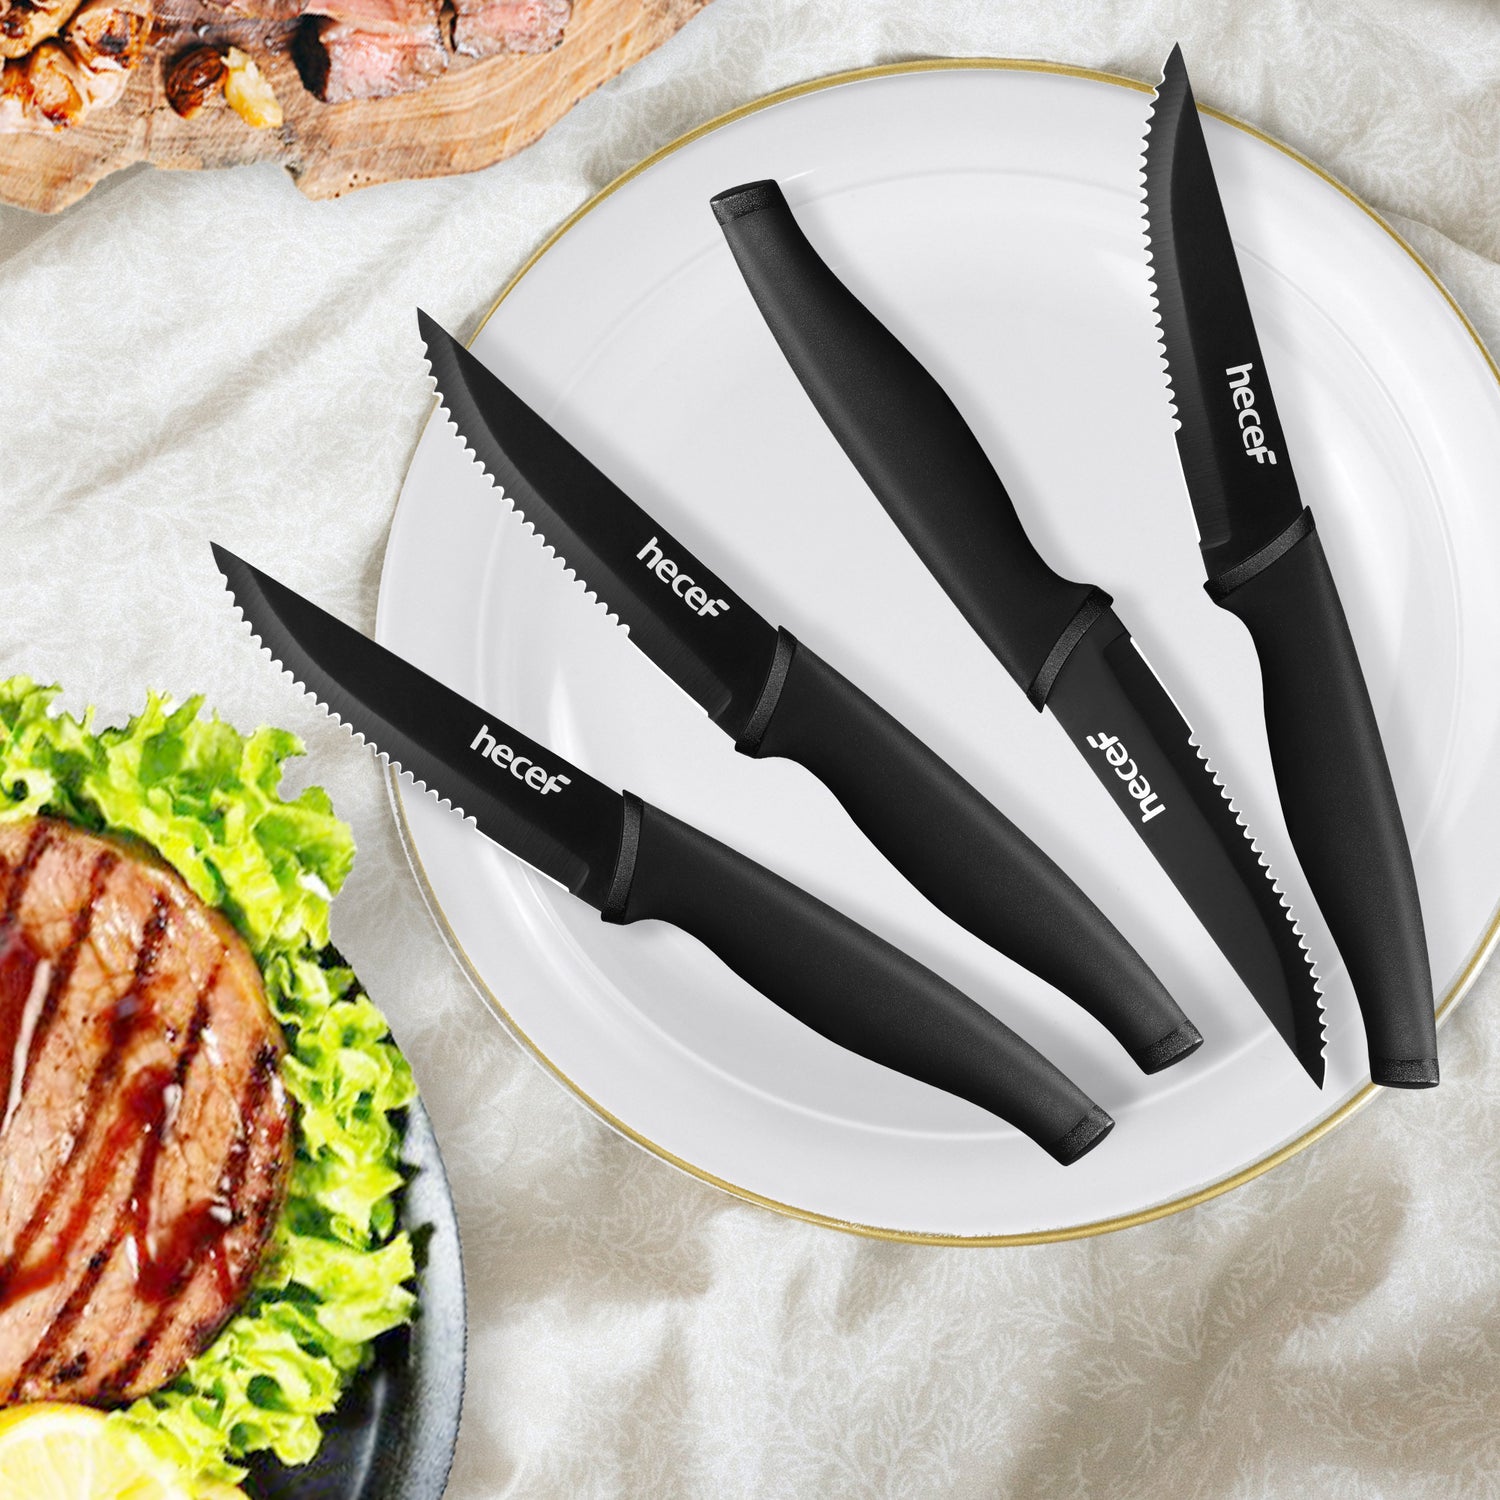 Hecef High Carbon Black Oxide Stainless Steel Chef Knife Set with 6 Blade  Guards 741393578614